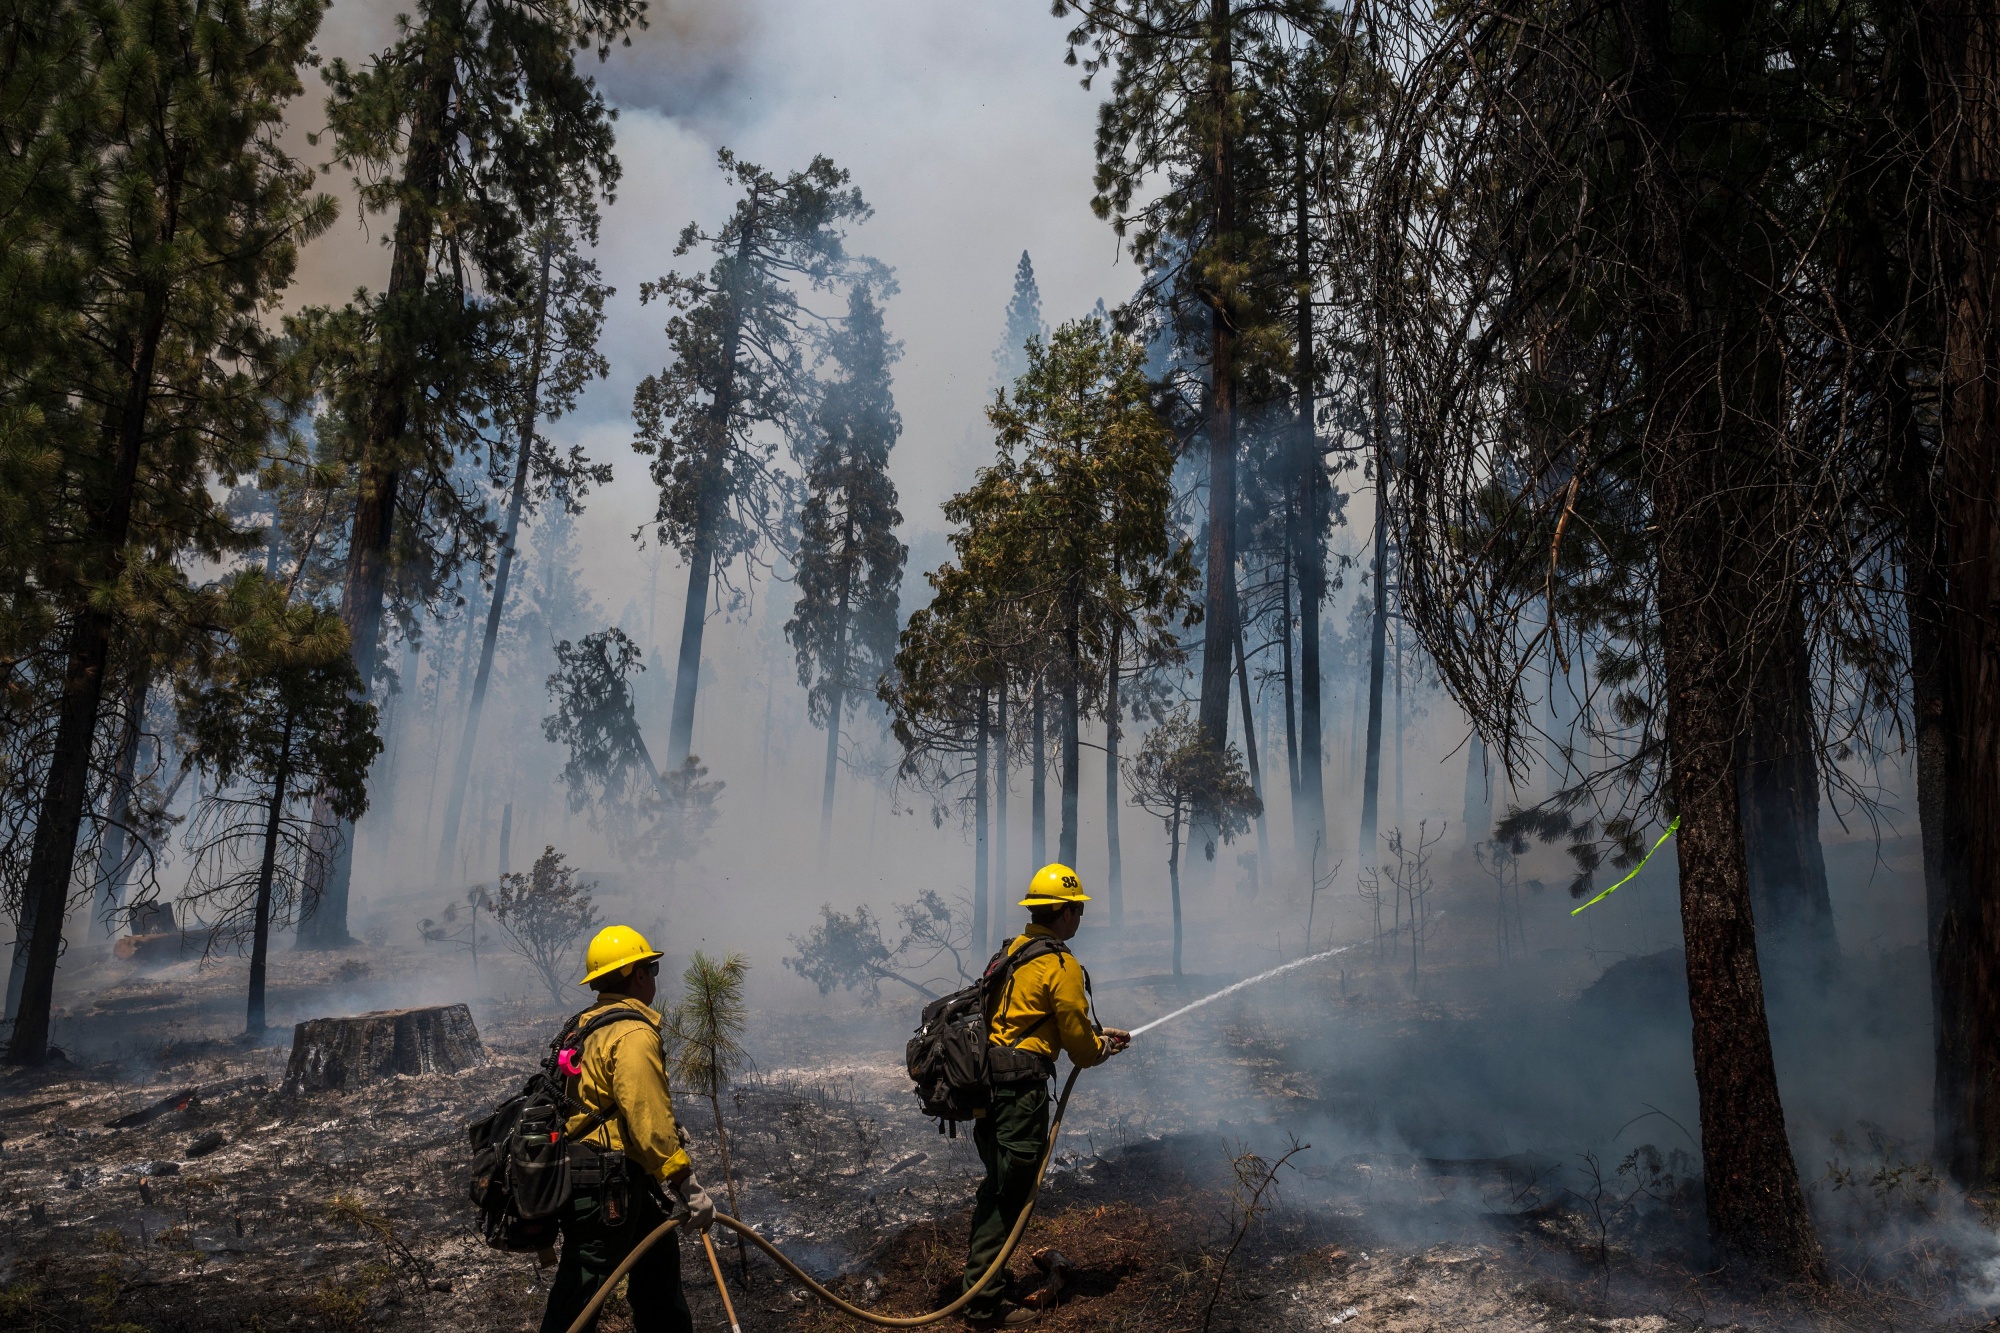 Firefighters put out hot spots in Yosemite National Park, California on July 11.